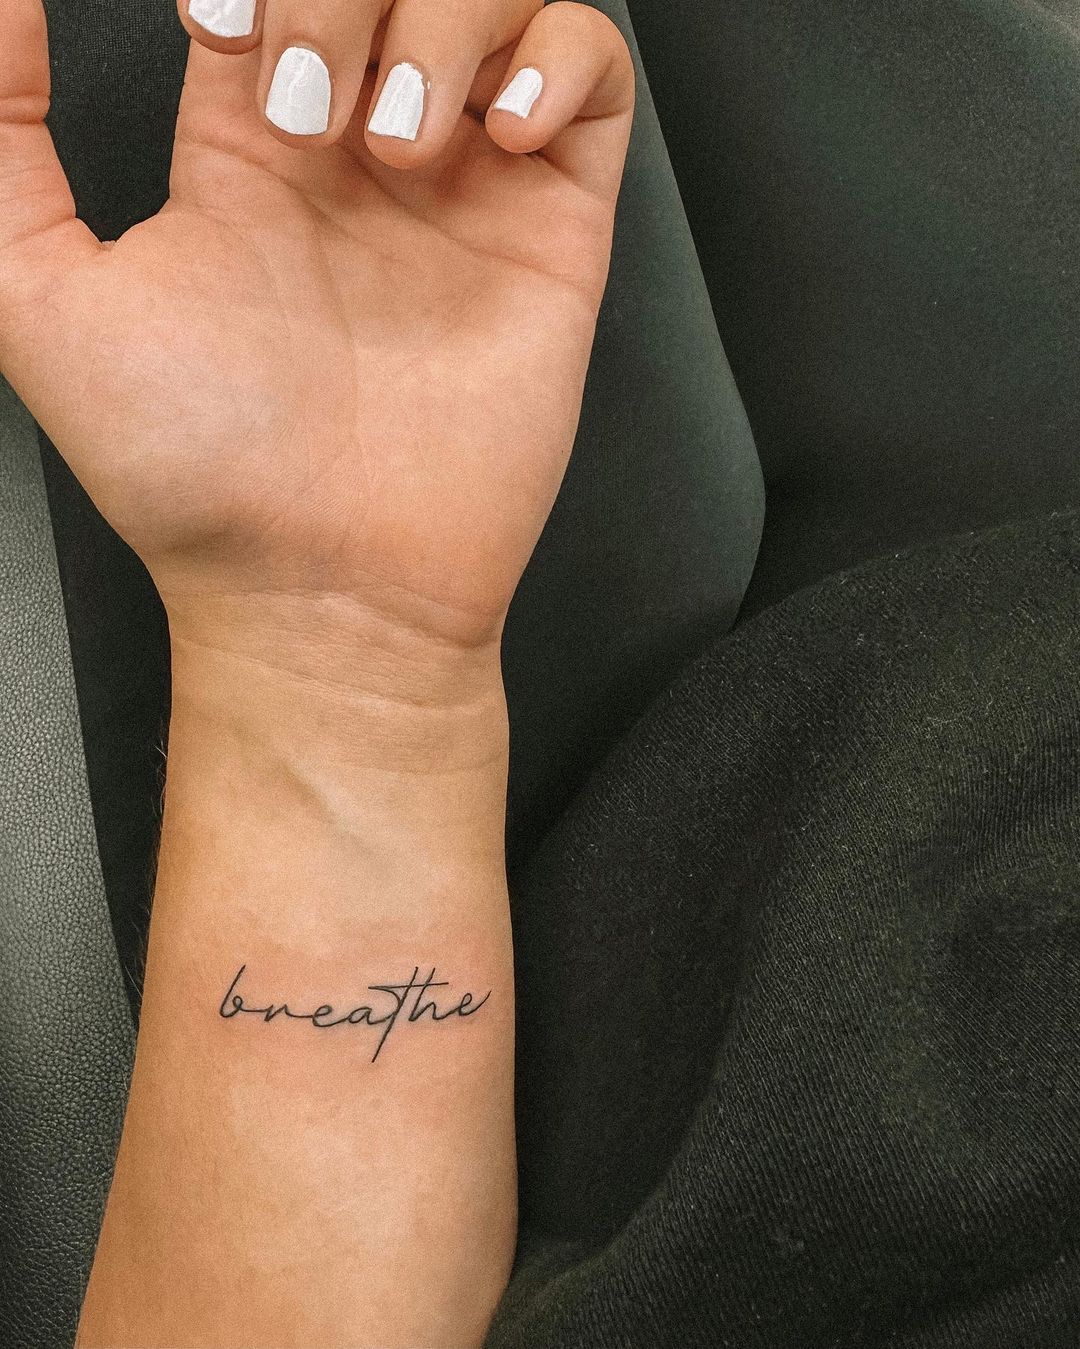 Inspirational Quotes and Words Temporary Tattoos | Realistic fake tattoos,  Inspirational words, Word tattoos